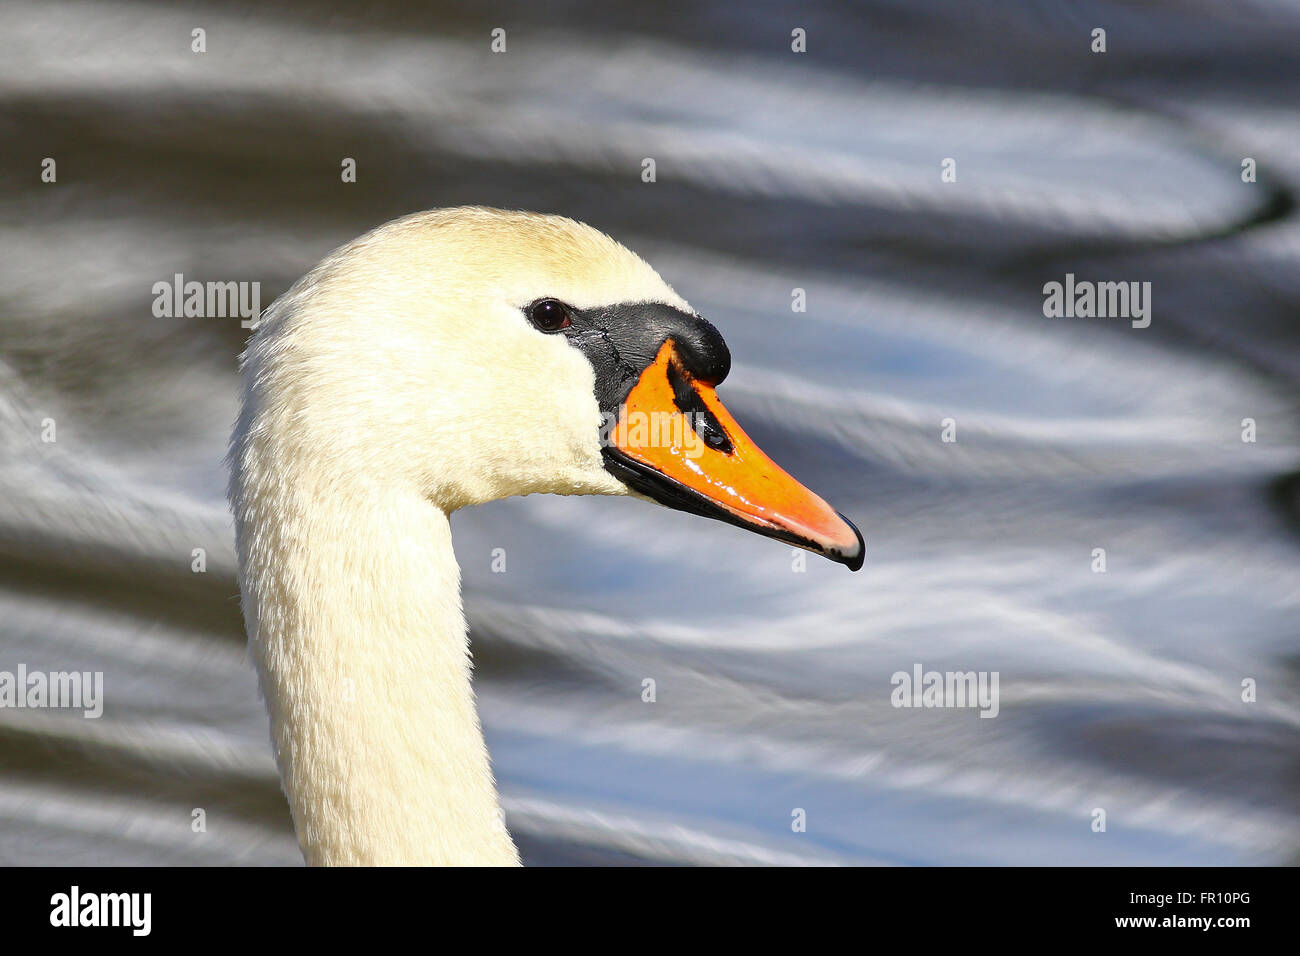 Bright portrait of a mute swan with blurred water reflections in the background Stock Photo